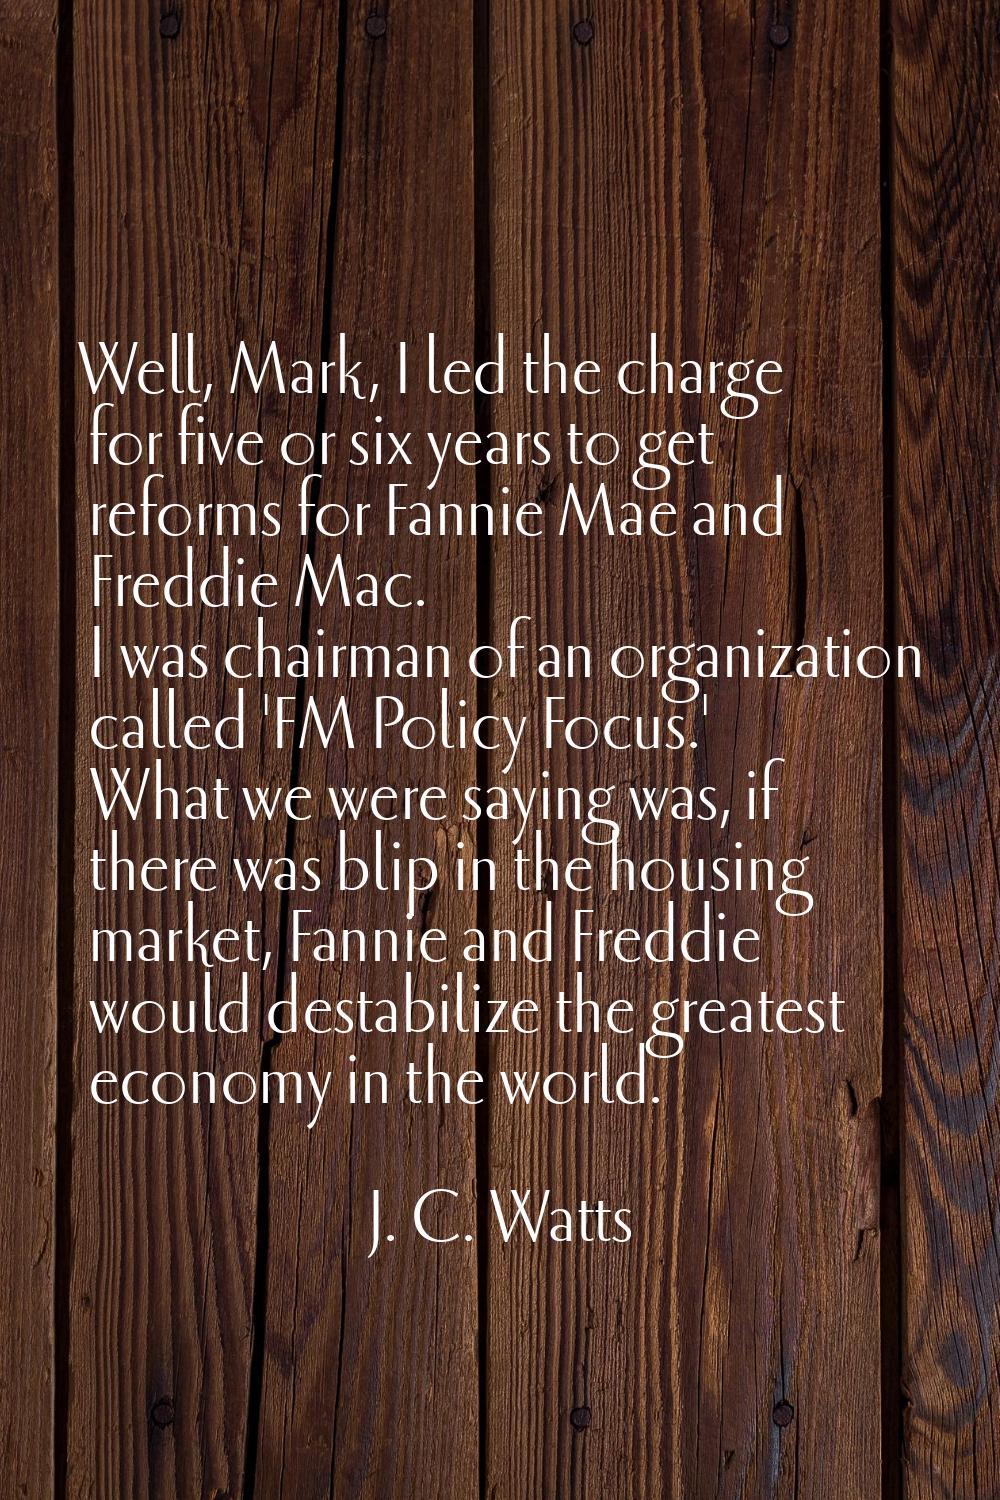 Well, Mark, I led the charge for five or six years to get reforms for Fannie Mae and Freddie Mac. I